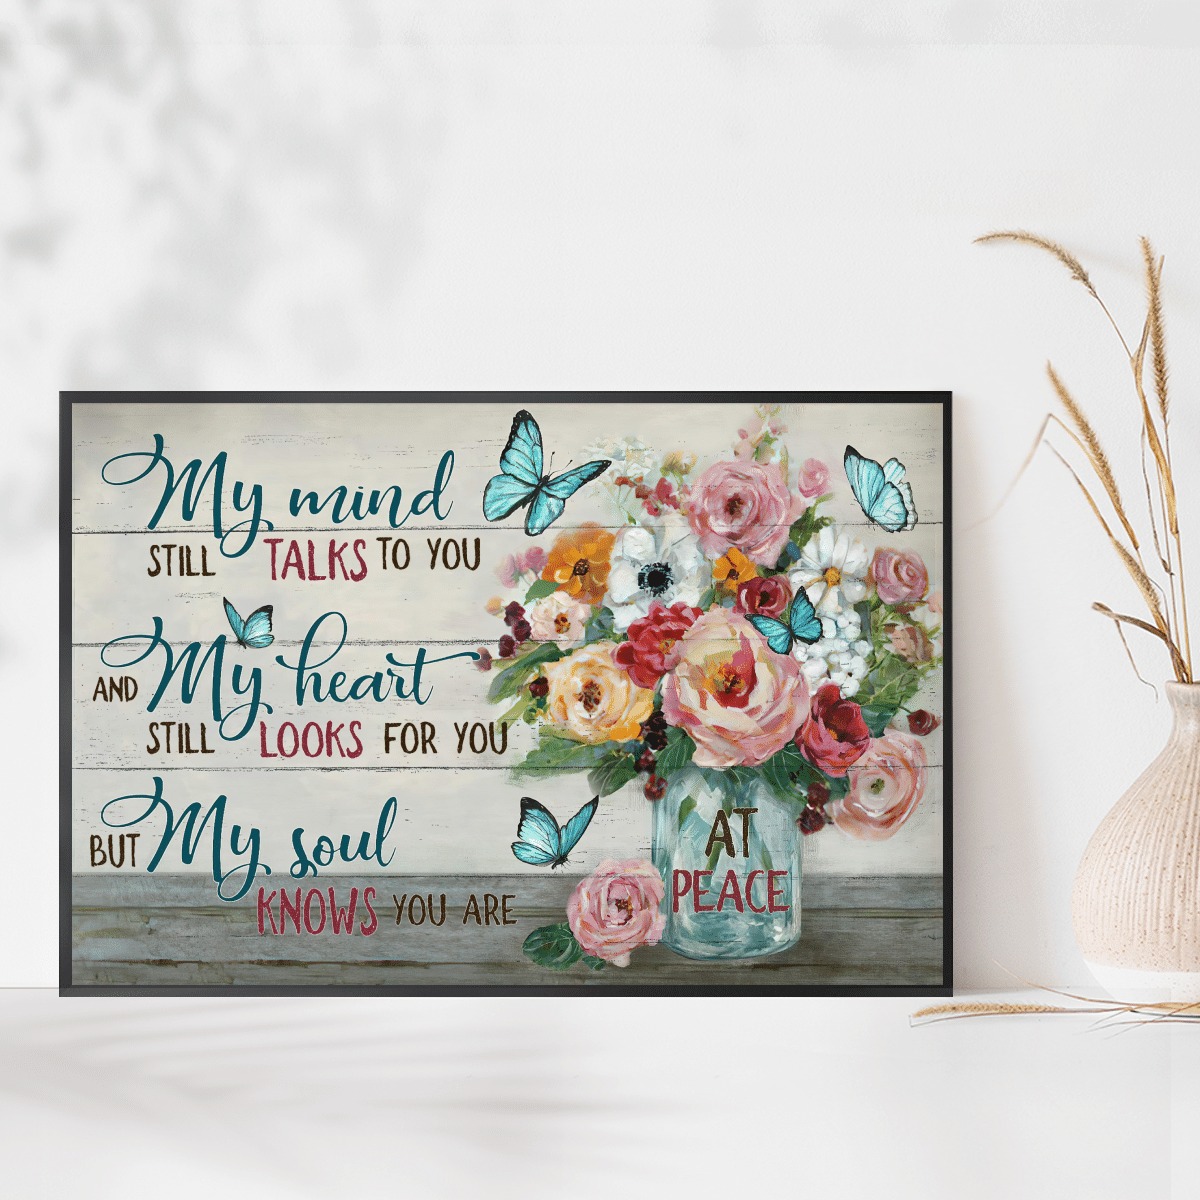 Jesus Flower vase My mind still talks to you at peace poster, canvas 11